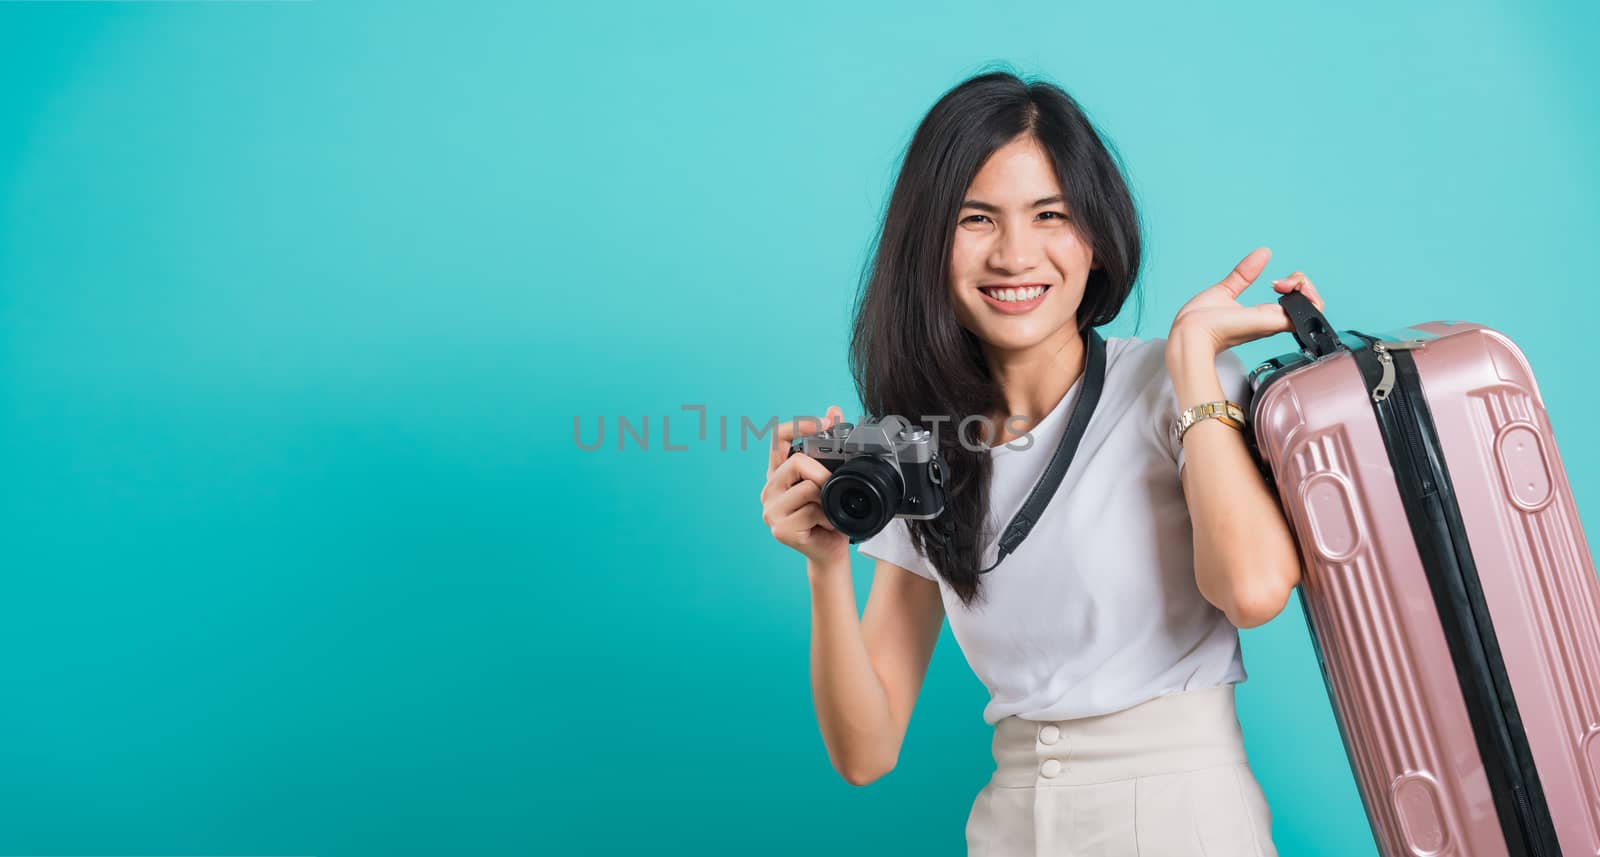 Traveler tourist happy Asian beautiful young woman standing wear white t-shirt, holidays travel concept, her holding suitcase bag and photo mirrorless camera, shoot photo in studio on blue background